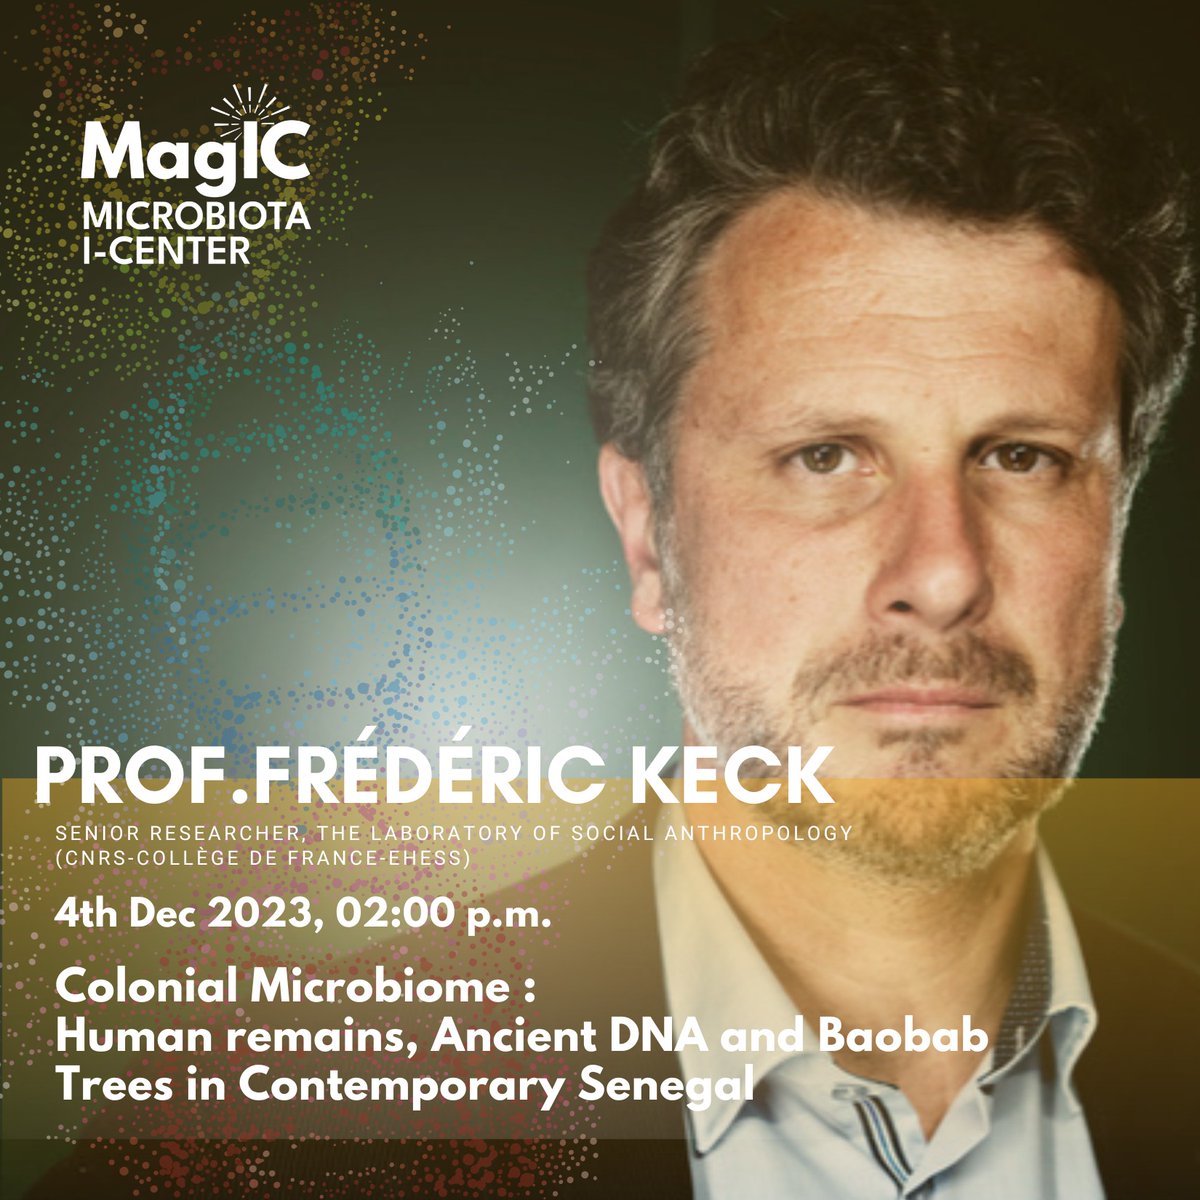 Join the talk by Prof. Frédéric Keck on 4 Dec, 14:00 Topic: 𝗖𝗼𝗹𝗼𝗻𝗶𝗮𝗹 𝗠𝗶𝗰𝗿𝗼𝗯𝗶𝗼𝗺𝗲: 𝗛𝘂𝗺𝗮𝗻 𝗿𝗲𝗺𝗮𝗶𝗻𝘀, 𝗮𝗻𝗰𝗶𝗲𝗻𝘁 𝗗𝗡𝗔, 𝗮𝗻𝗱 𝗯𝗮𝗼𝗯𝗮𝗯 𝘁𝗿𝗲𝗲𝘀 𝗶𝗻 𝗰𝗼𝗻𝘁𝗲𝗺𝗽𝗼𝗿𝗮𝗿𝘆 𝗦𝗲𝗻𝗲𝗴𝗮𝗹 lnkd.in/gkMEFMpy ID: 941 5012 3333 P/W: 0591 36